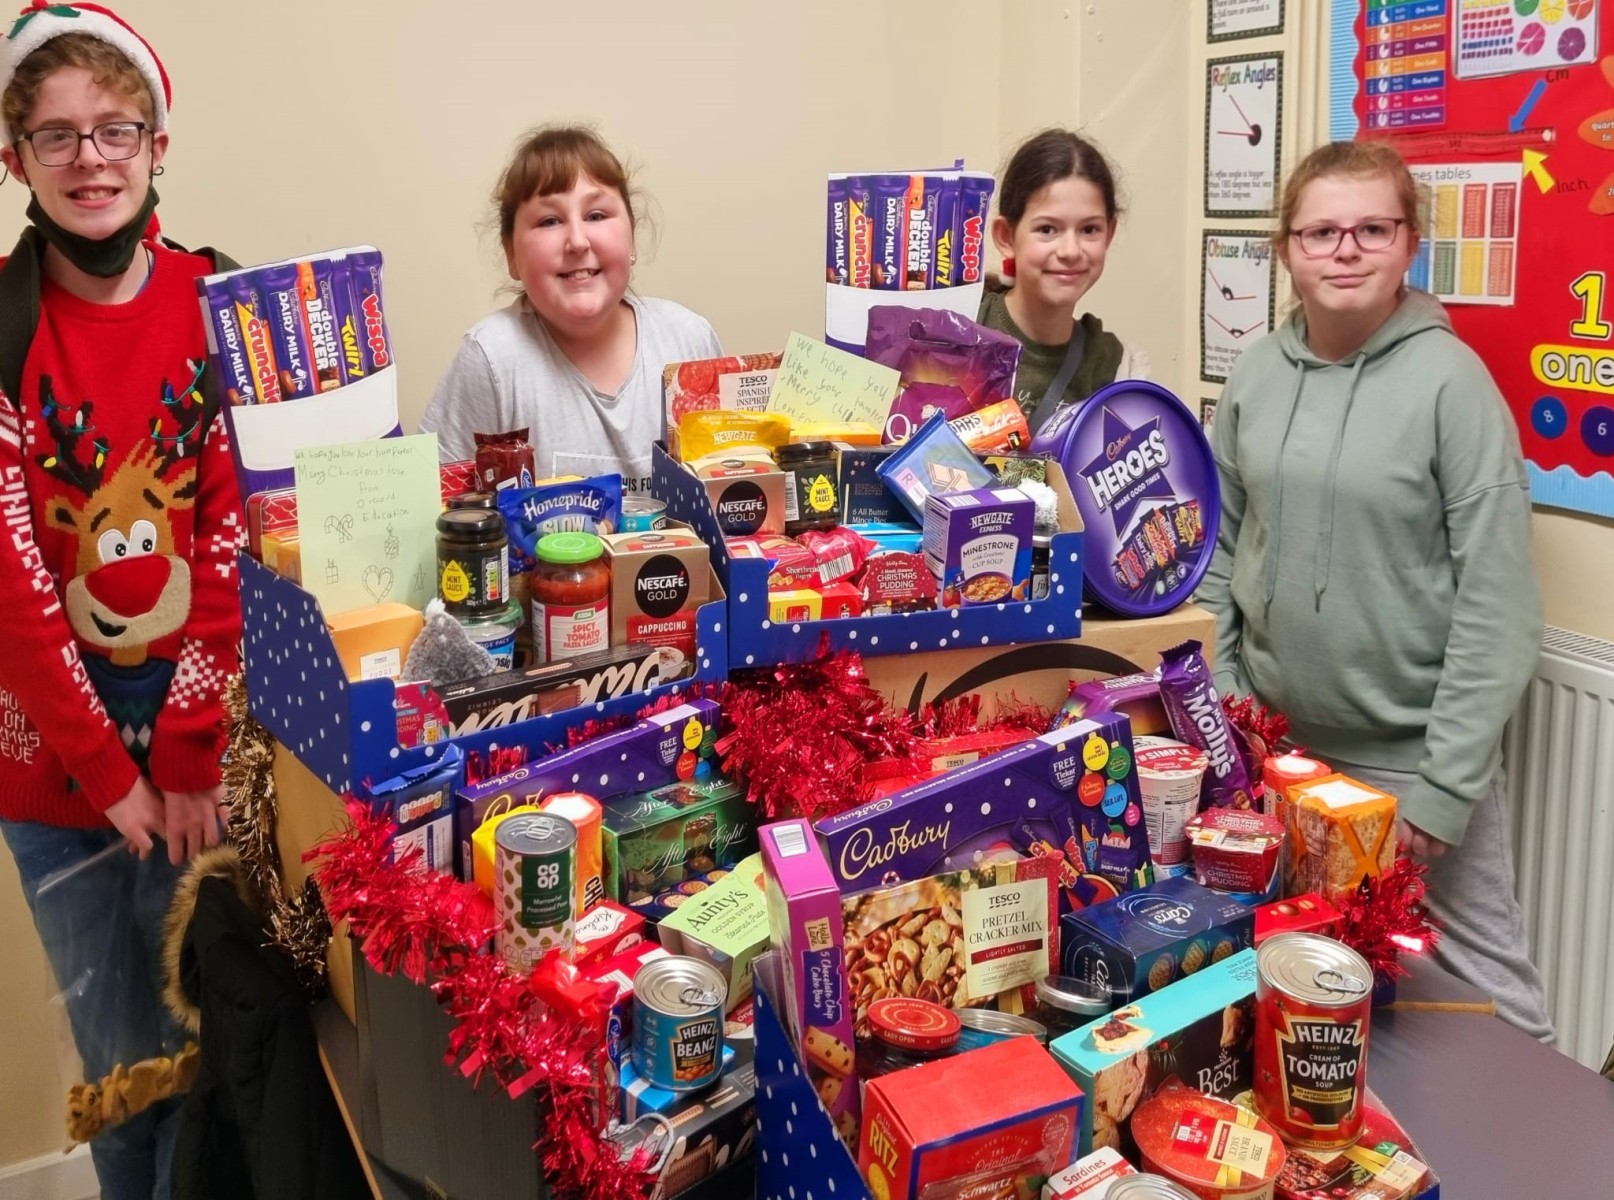 Pupils from the Laceby Road site of Orchard Education Special Educational Needs school in Grimsby collecting and delivering Harvest festival hampers in their local community.